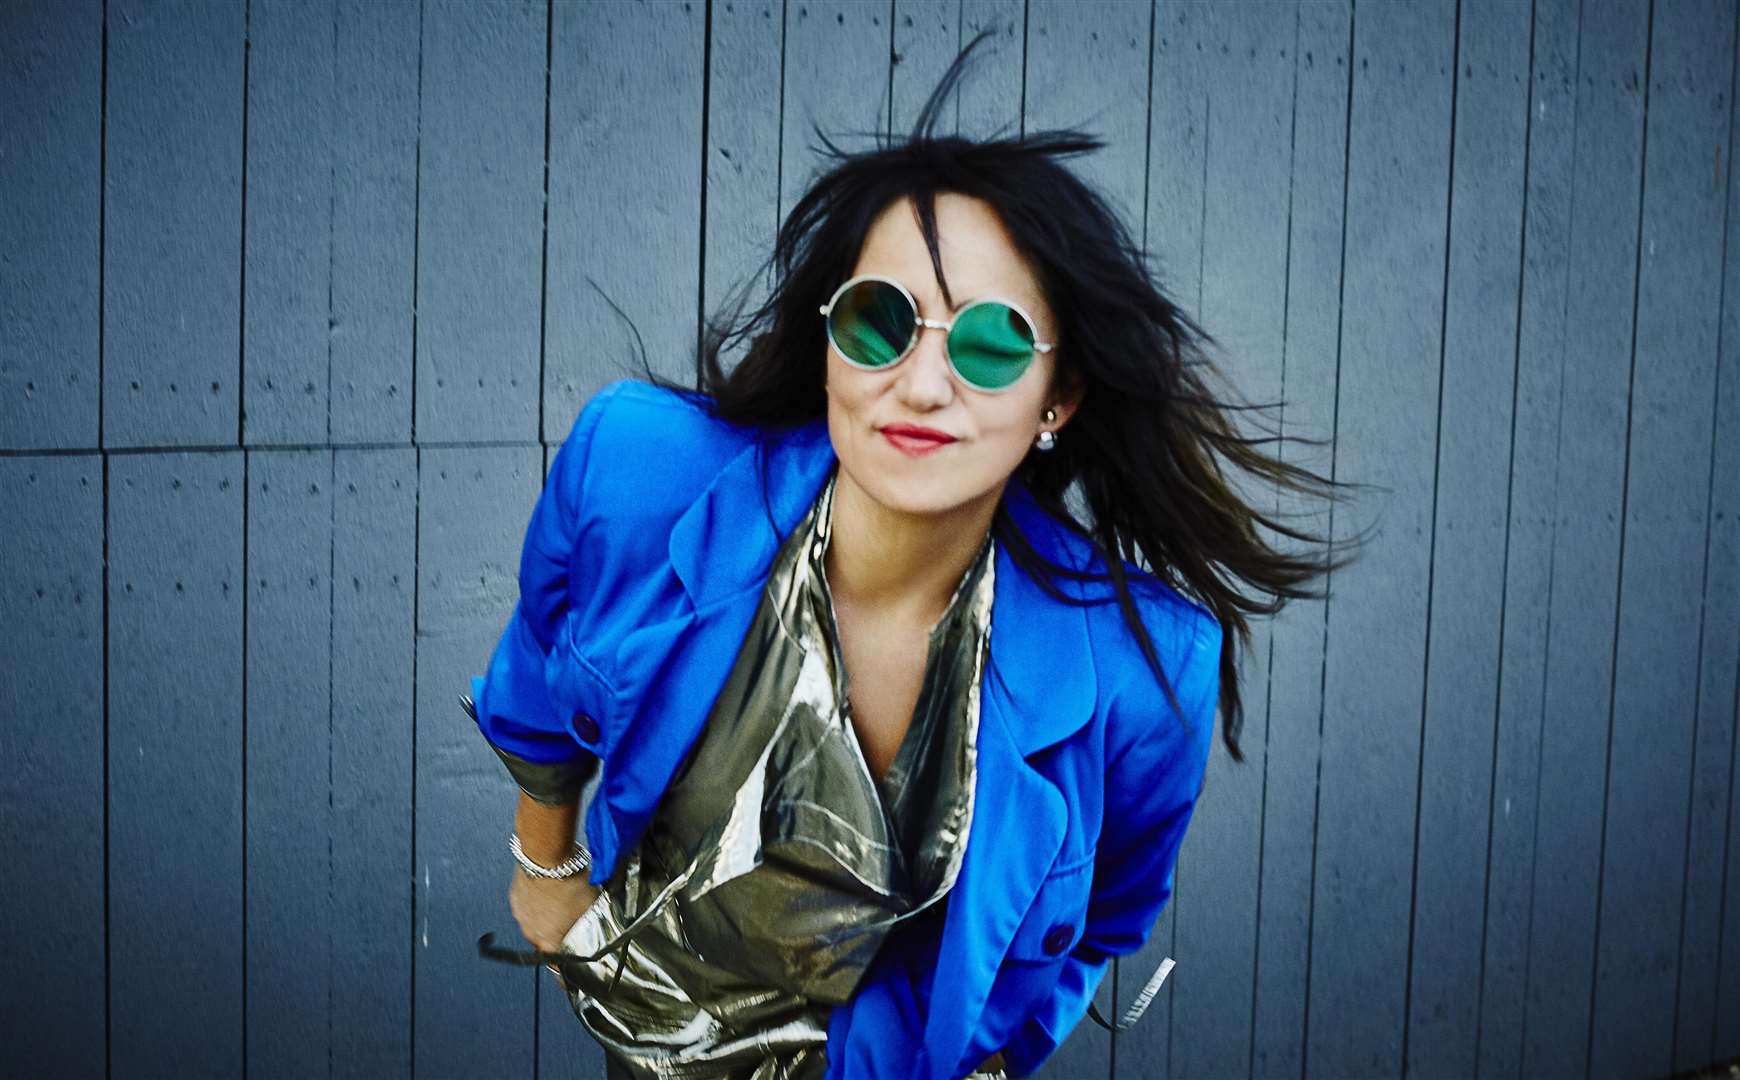 KT Tunstall will play in Rye